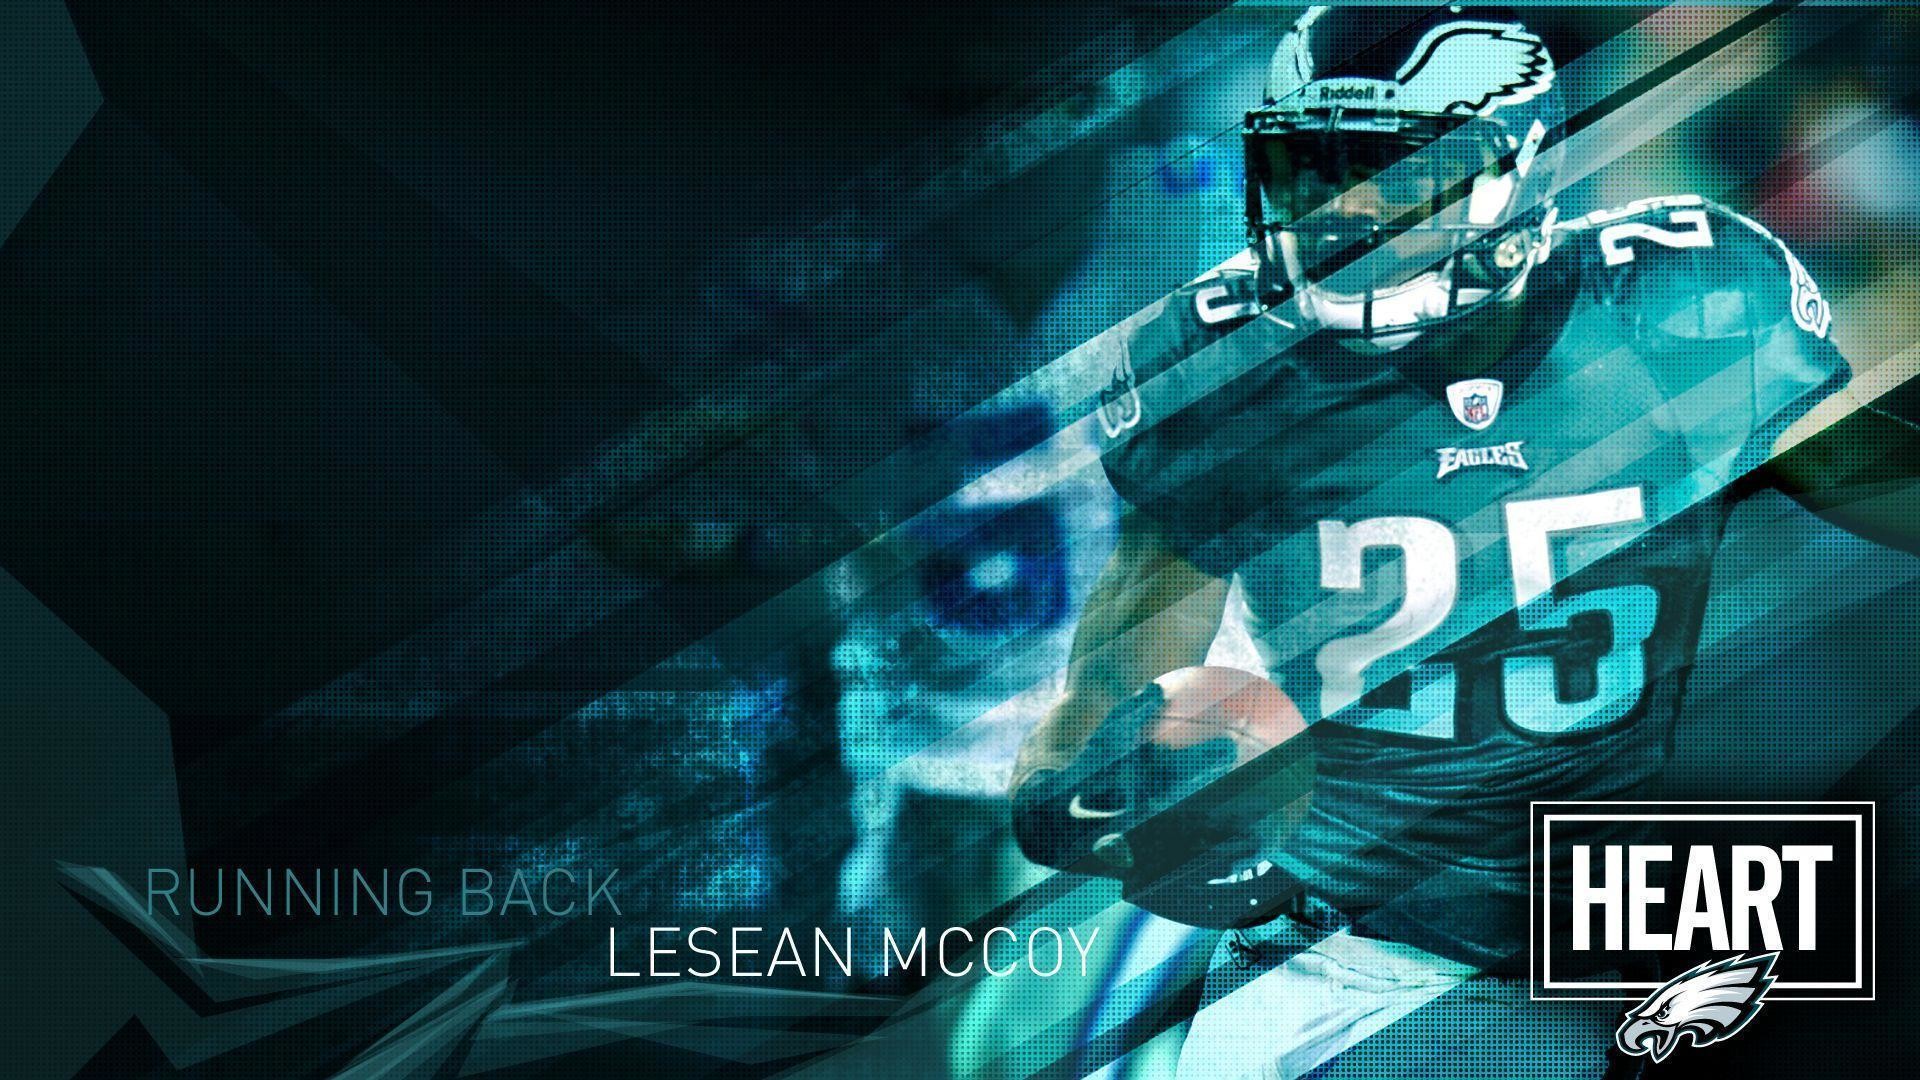 1920x1080 Player Nfl Eagles Wallpaper Pictures to Pin on Pinterest - PinsDaddy